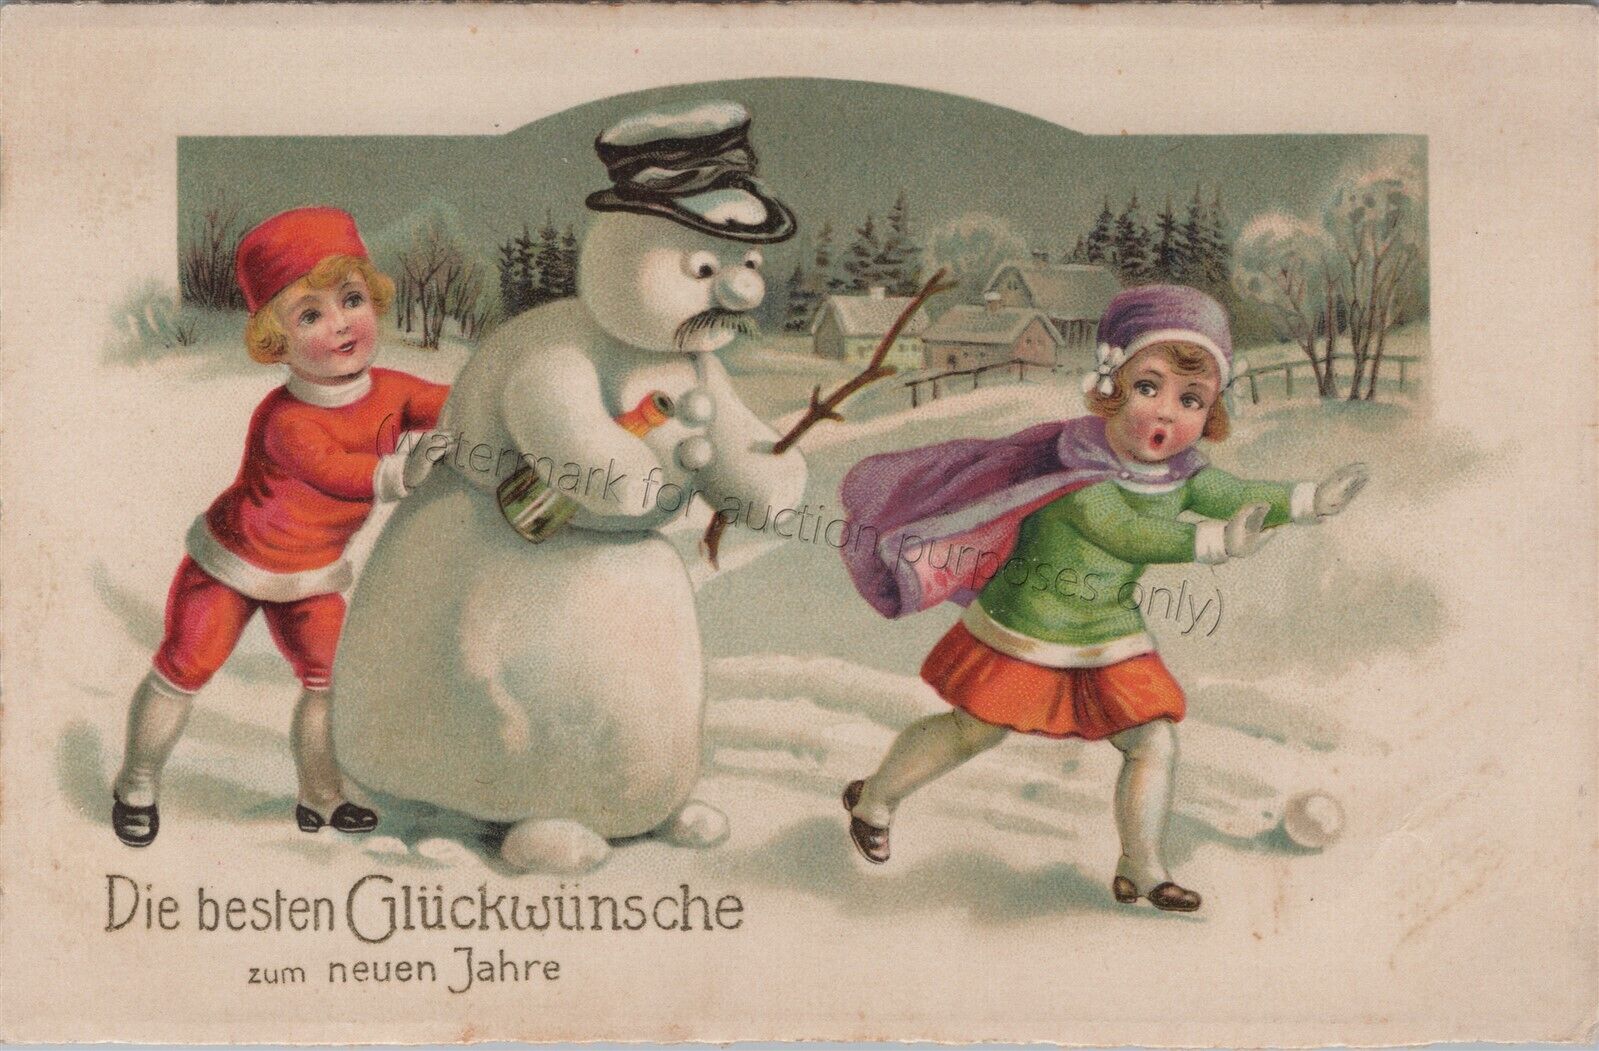 German Snowman w/ Mustache - New Year Holiday Vintage Illustrated Postcard 